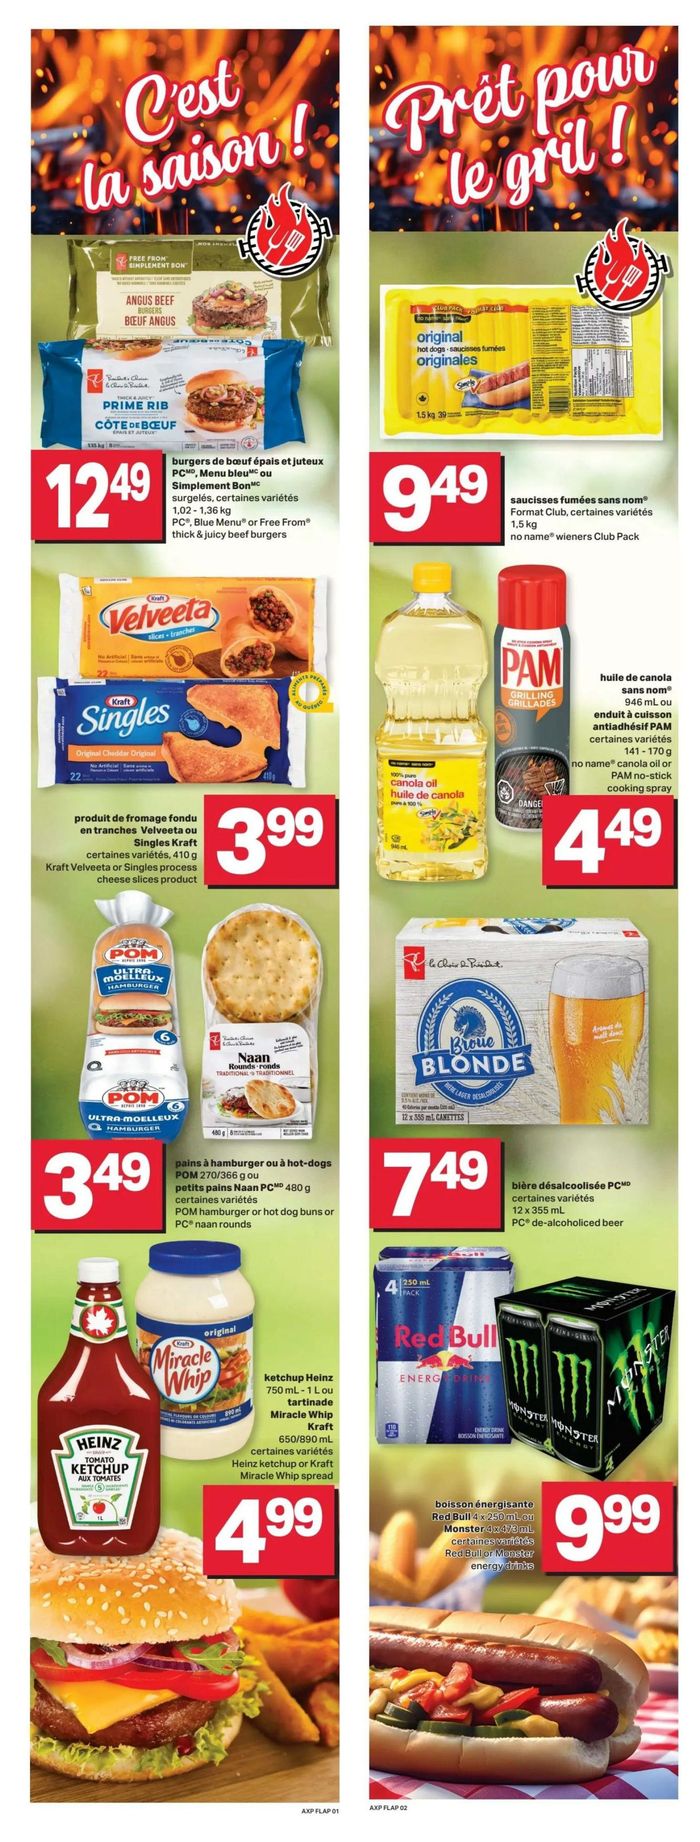 Axep catalogue in Saint-Georges | Axep Weekly ad | 2024-04-25 - 2024-05-01